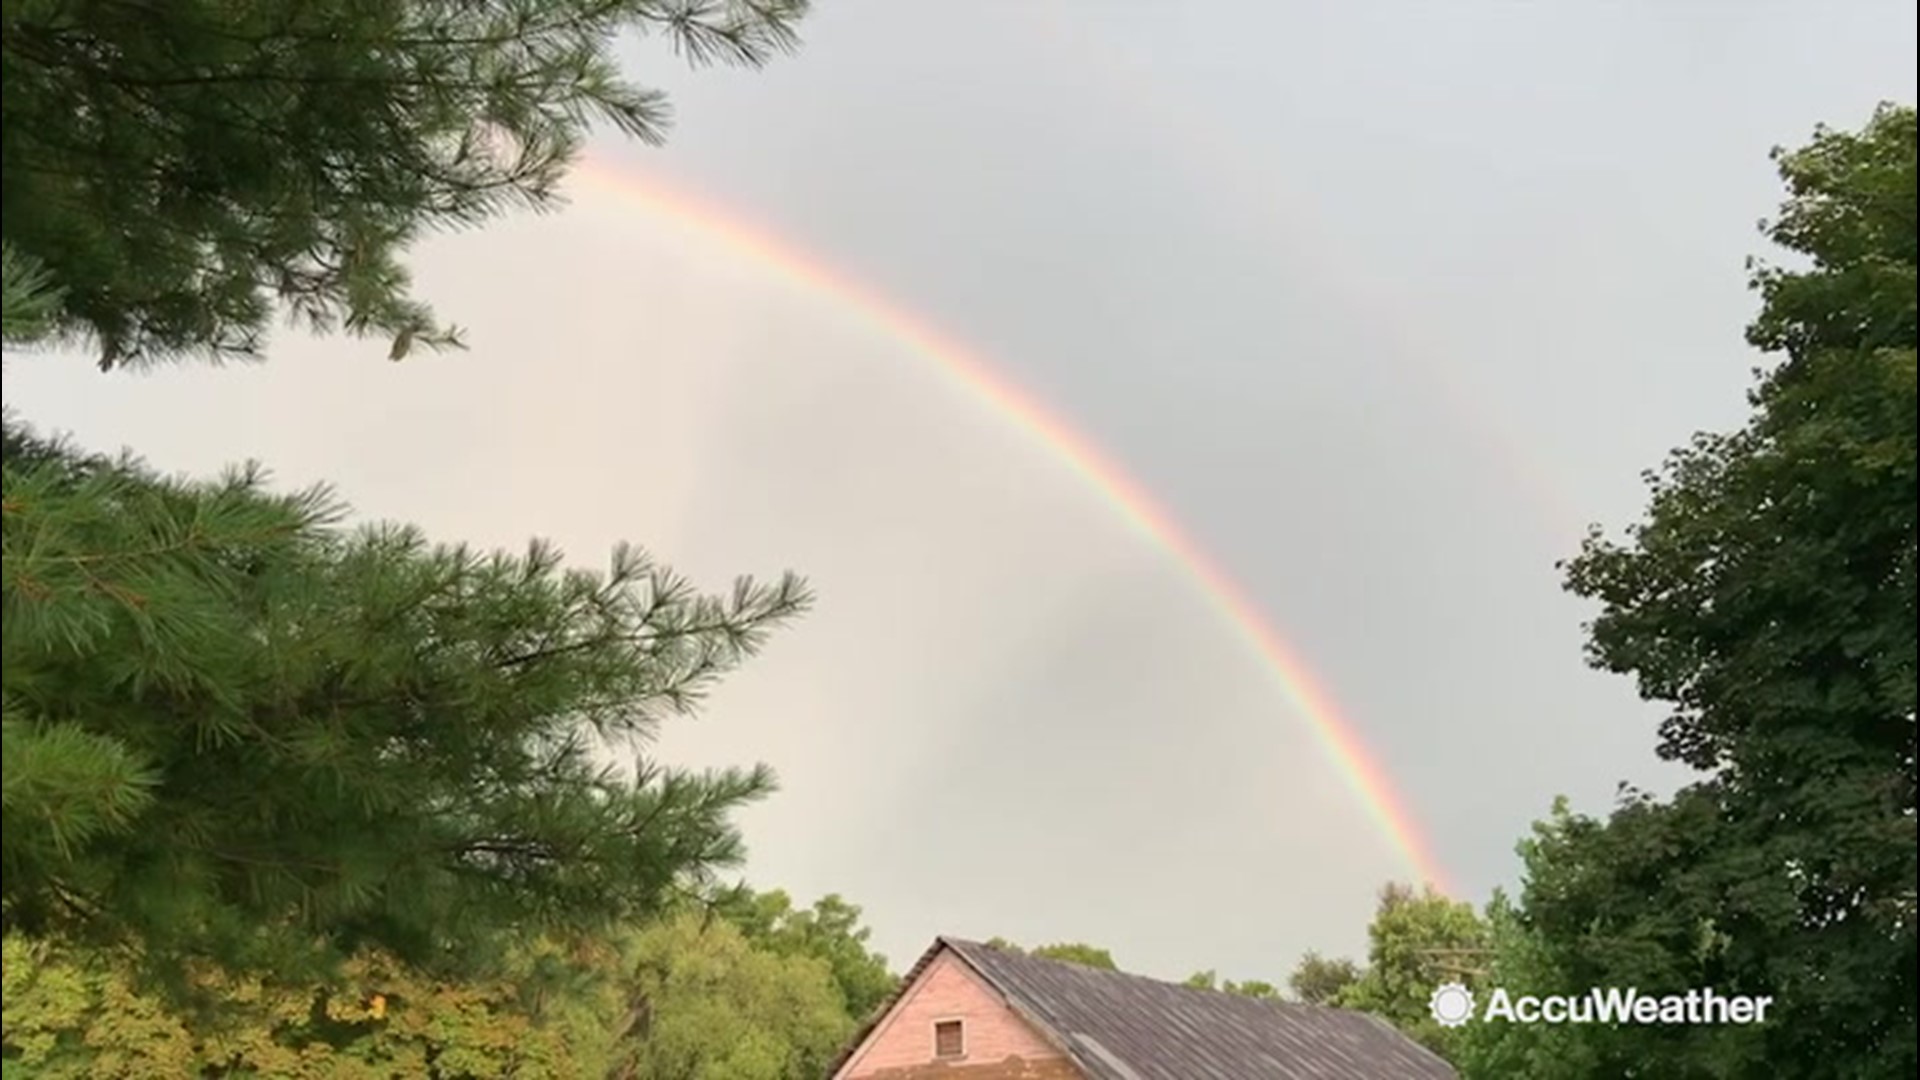 On Aug. 15 a rainbow was spotted shining over Millheim, Pennsylvania, even though thunder was still roaring.